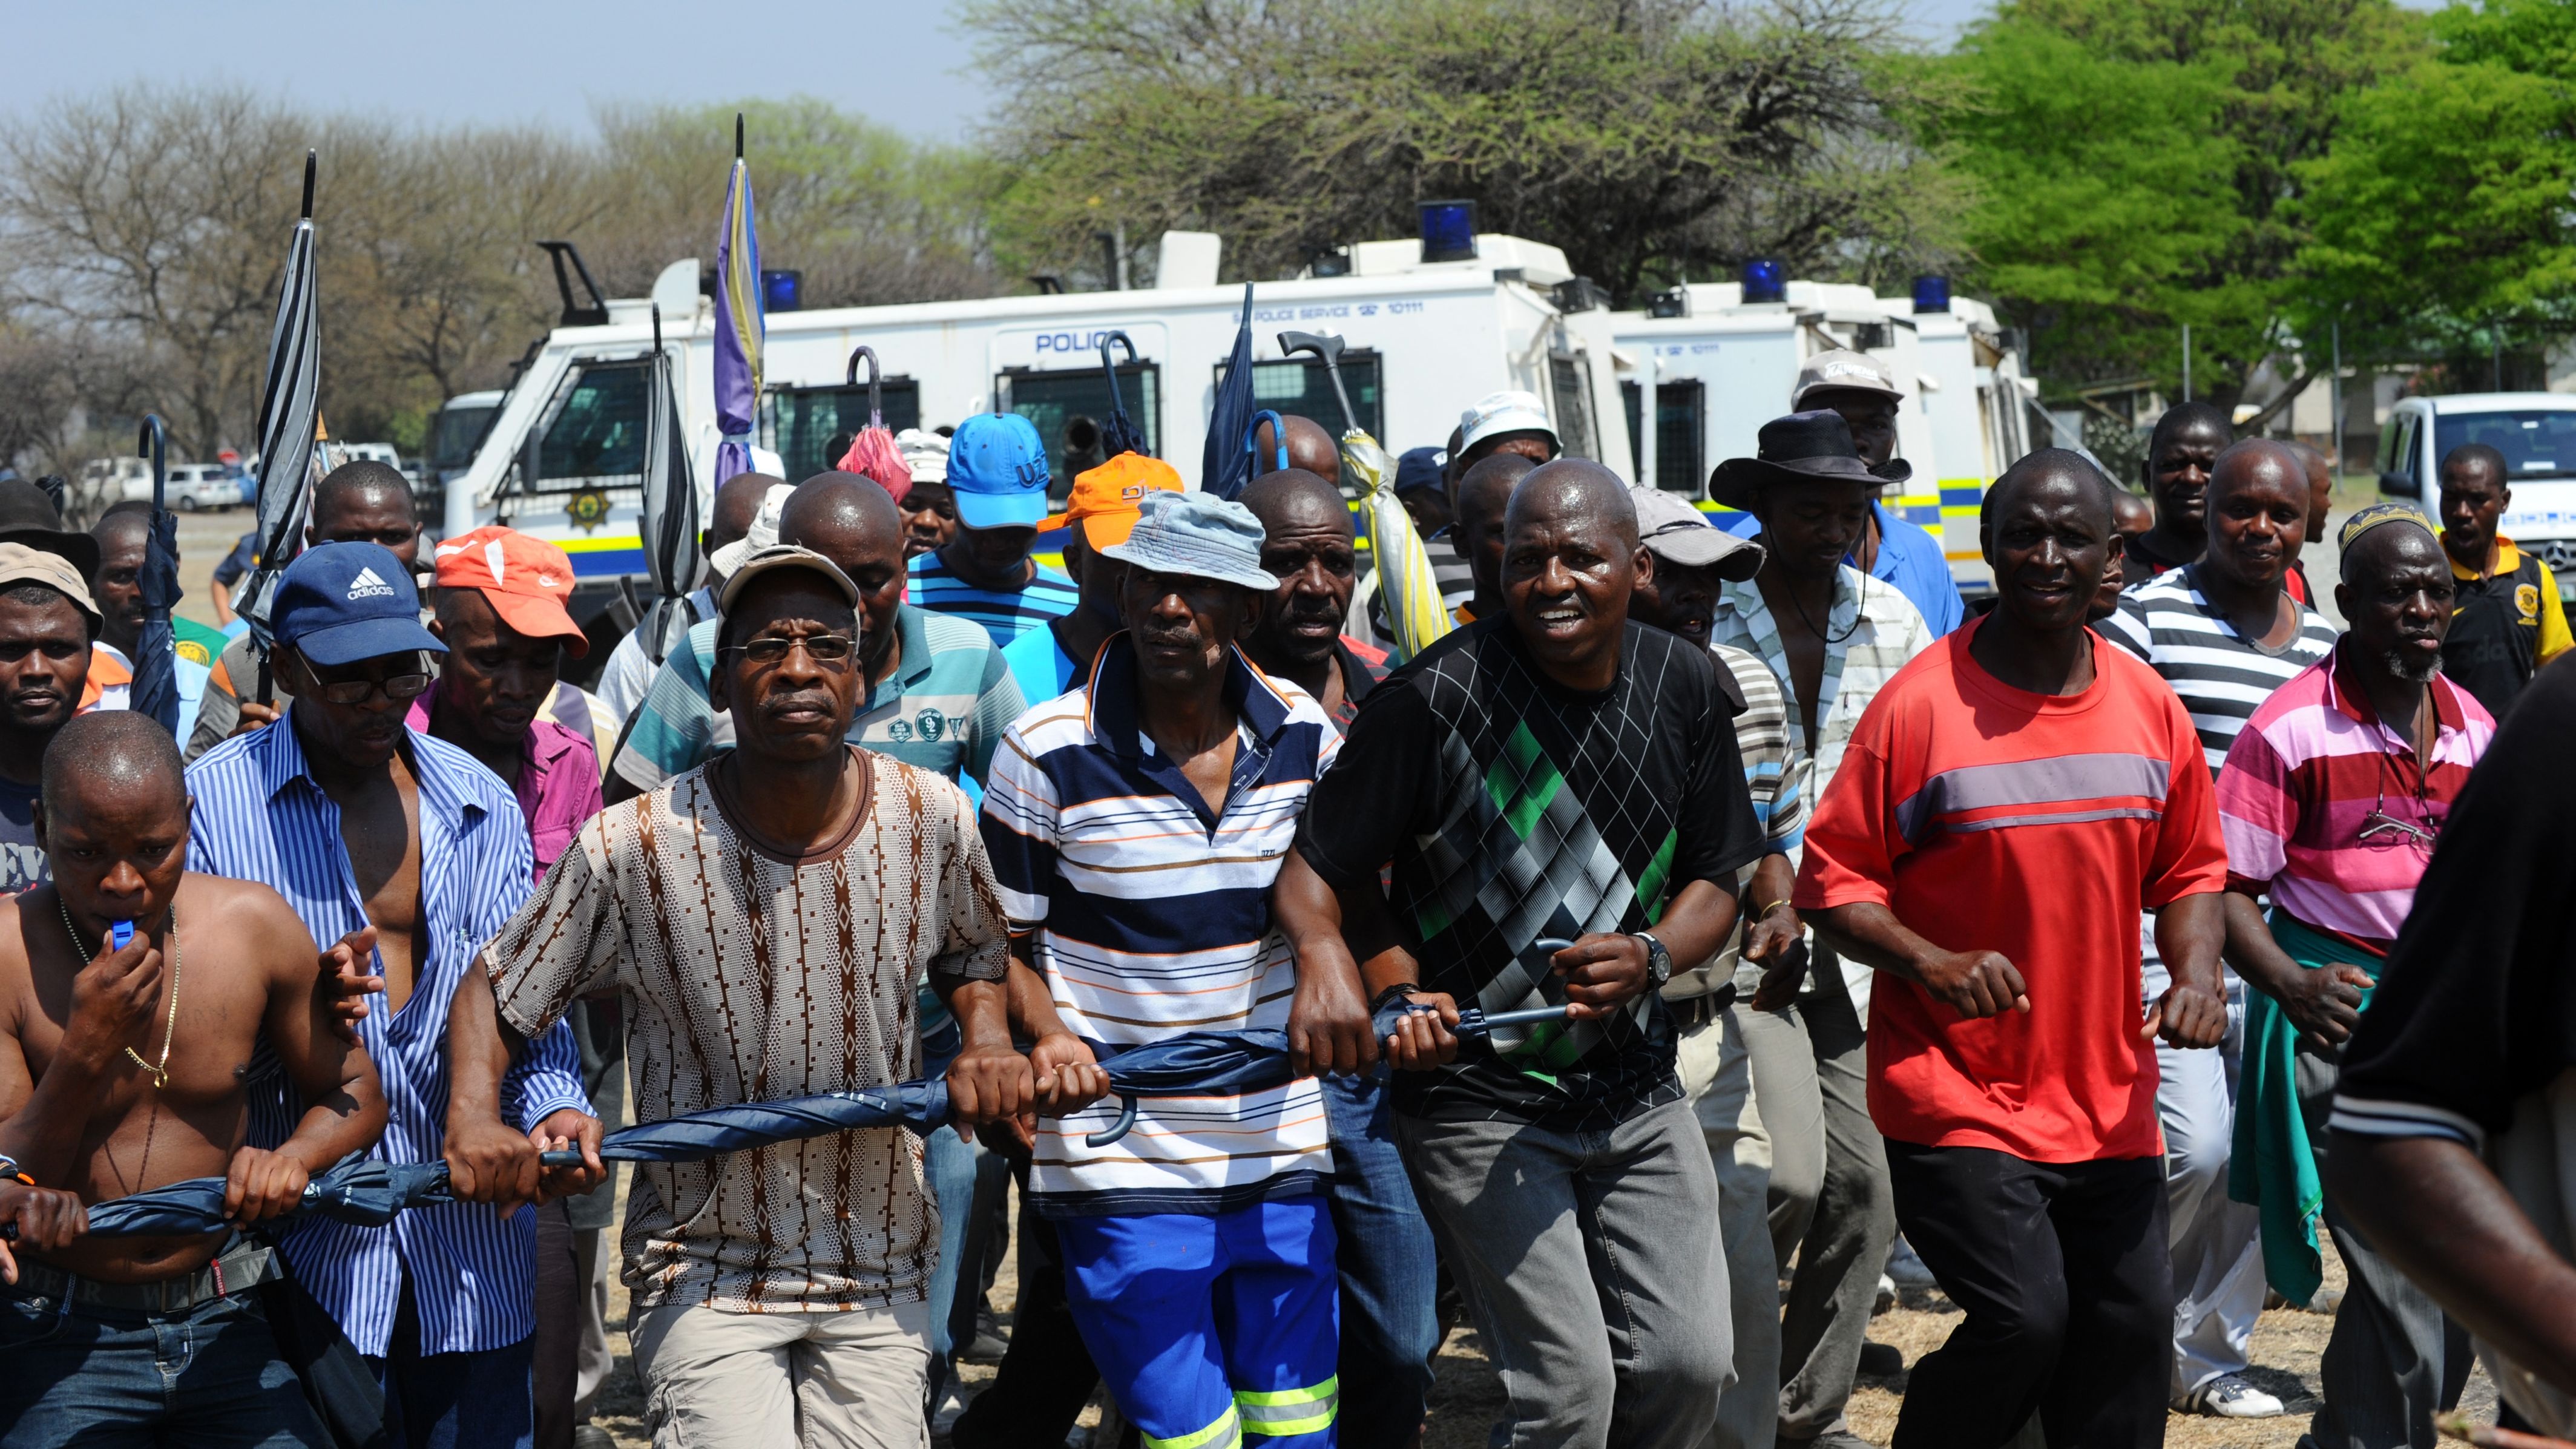 Some of the 12,000 miners sacked by Anglo American Platinum protest their dismissal in Rustenberg on October 6, 2012.